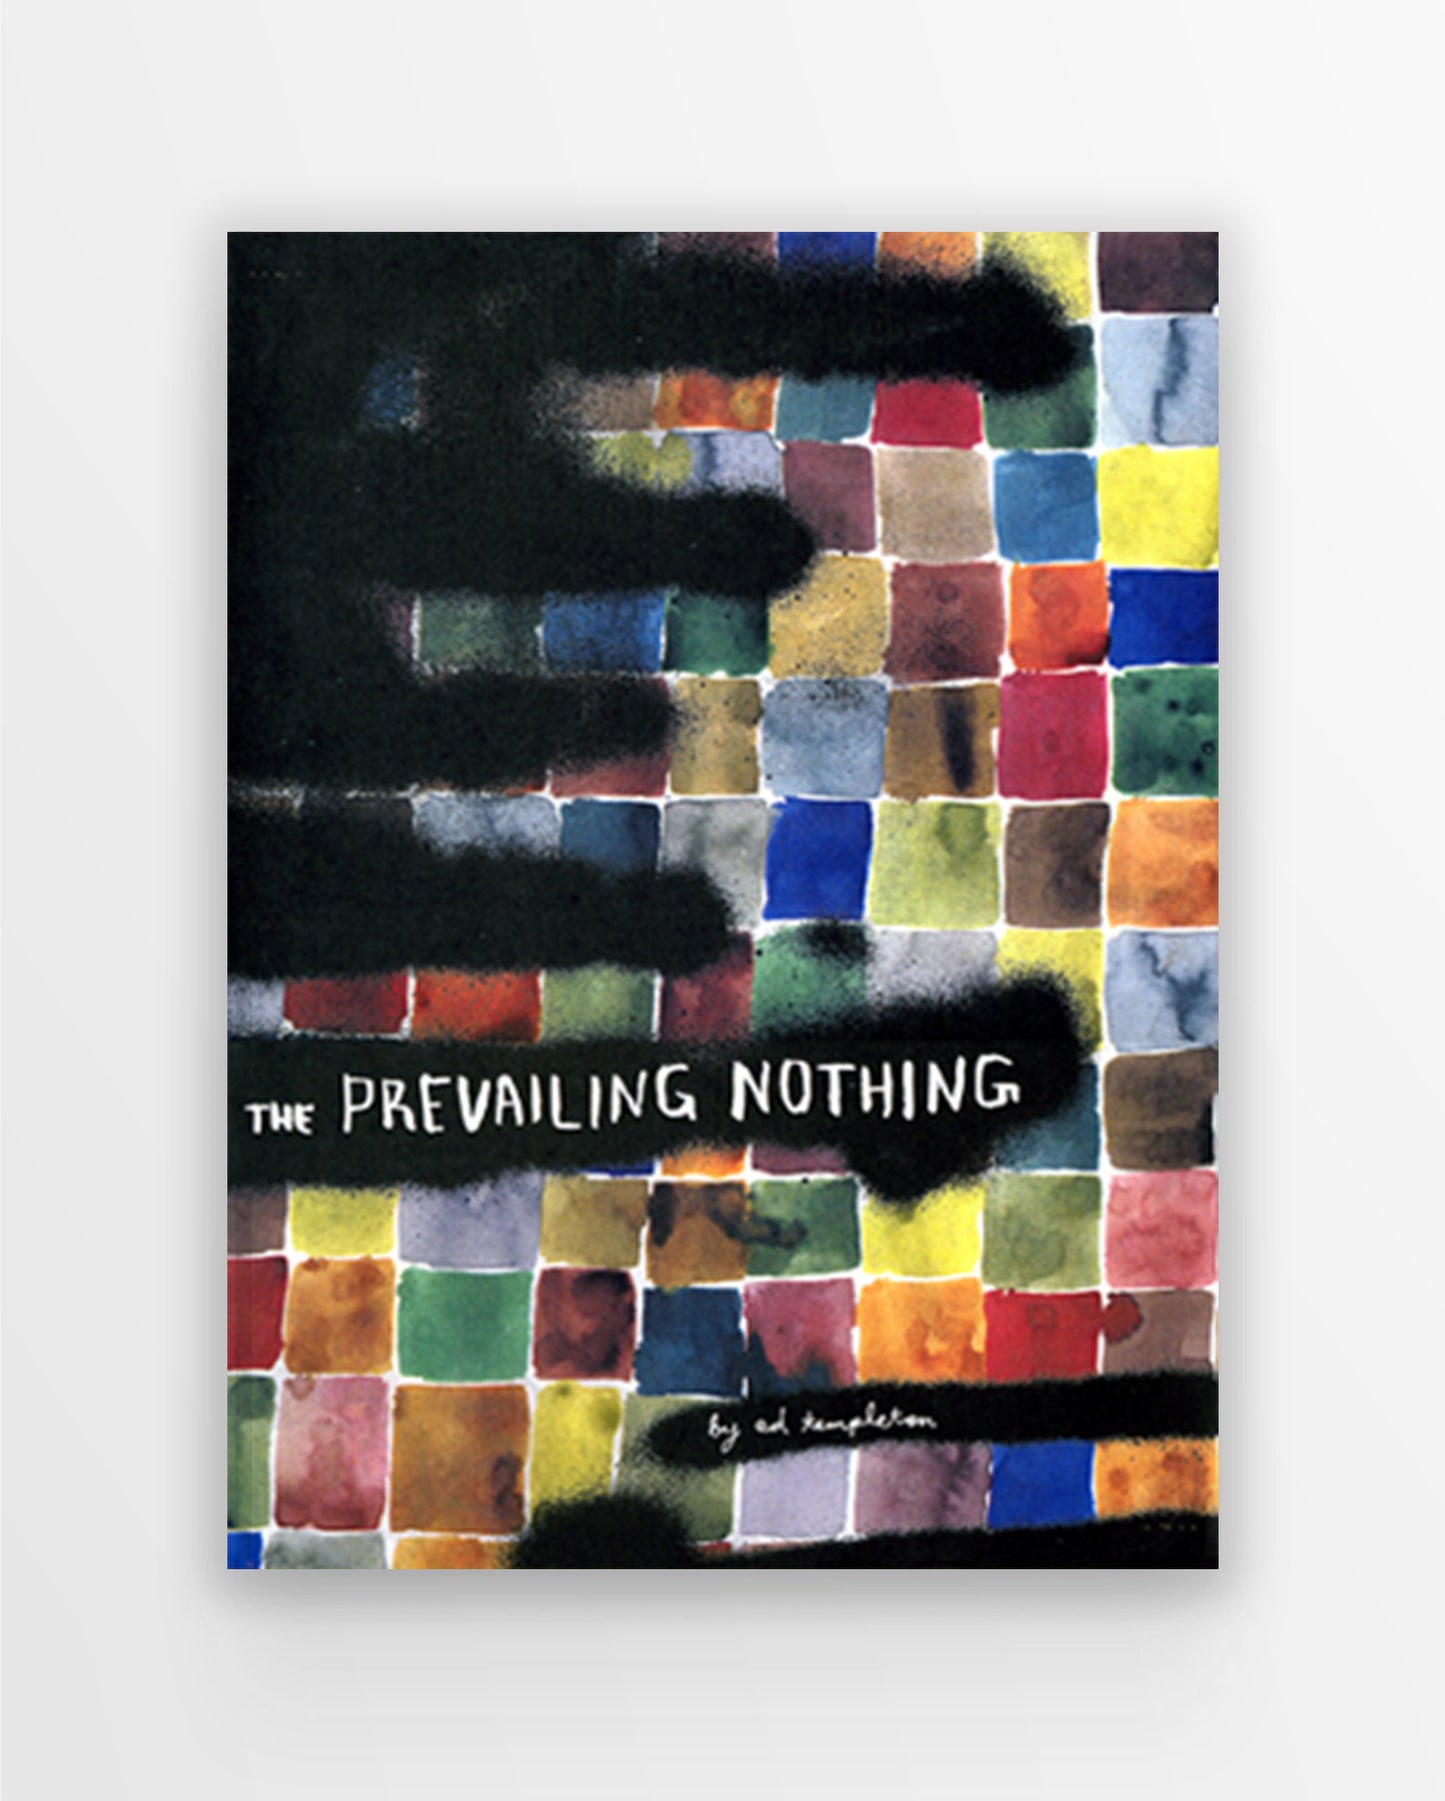 Ed Templeton: The Prevailing Nothing